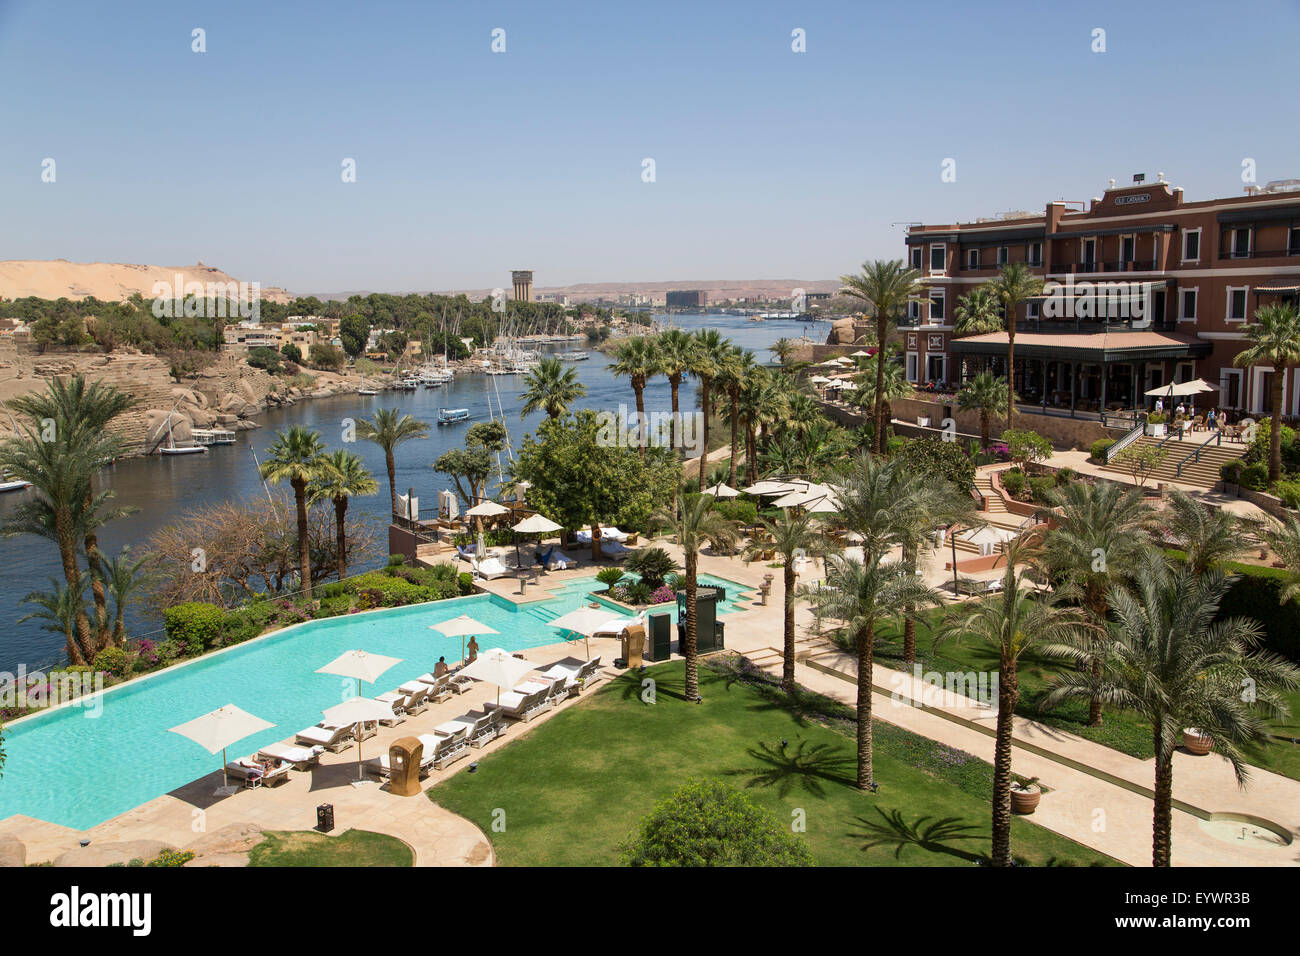 Old Cataract Hotel on the Nile River, Aswan, Egypt, North Africa, Africa Stock Photo